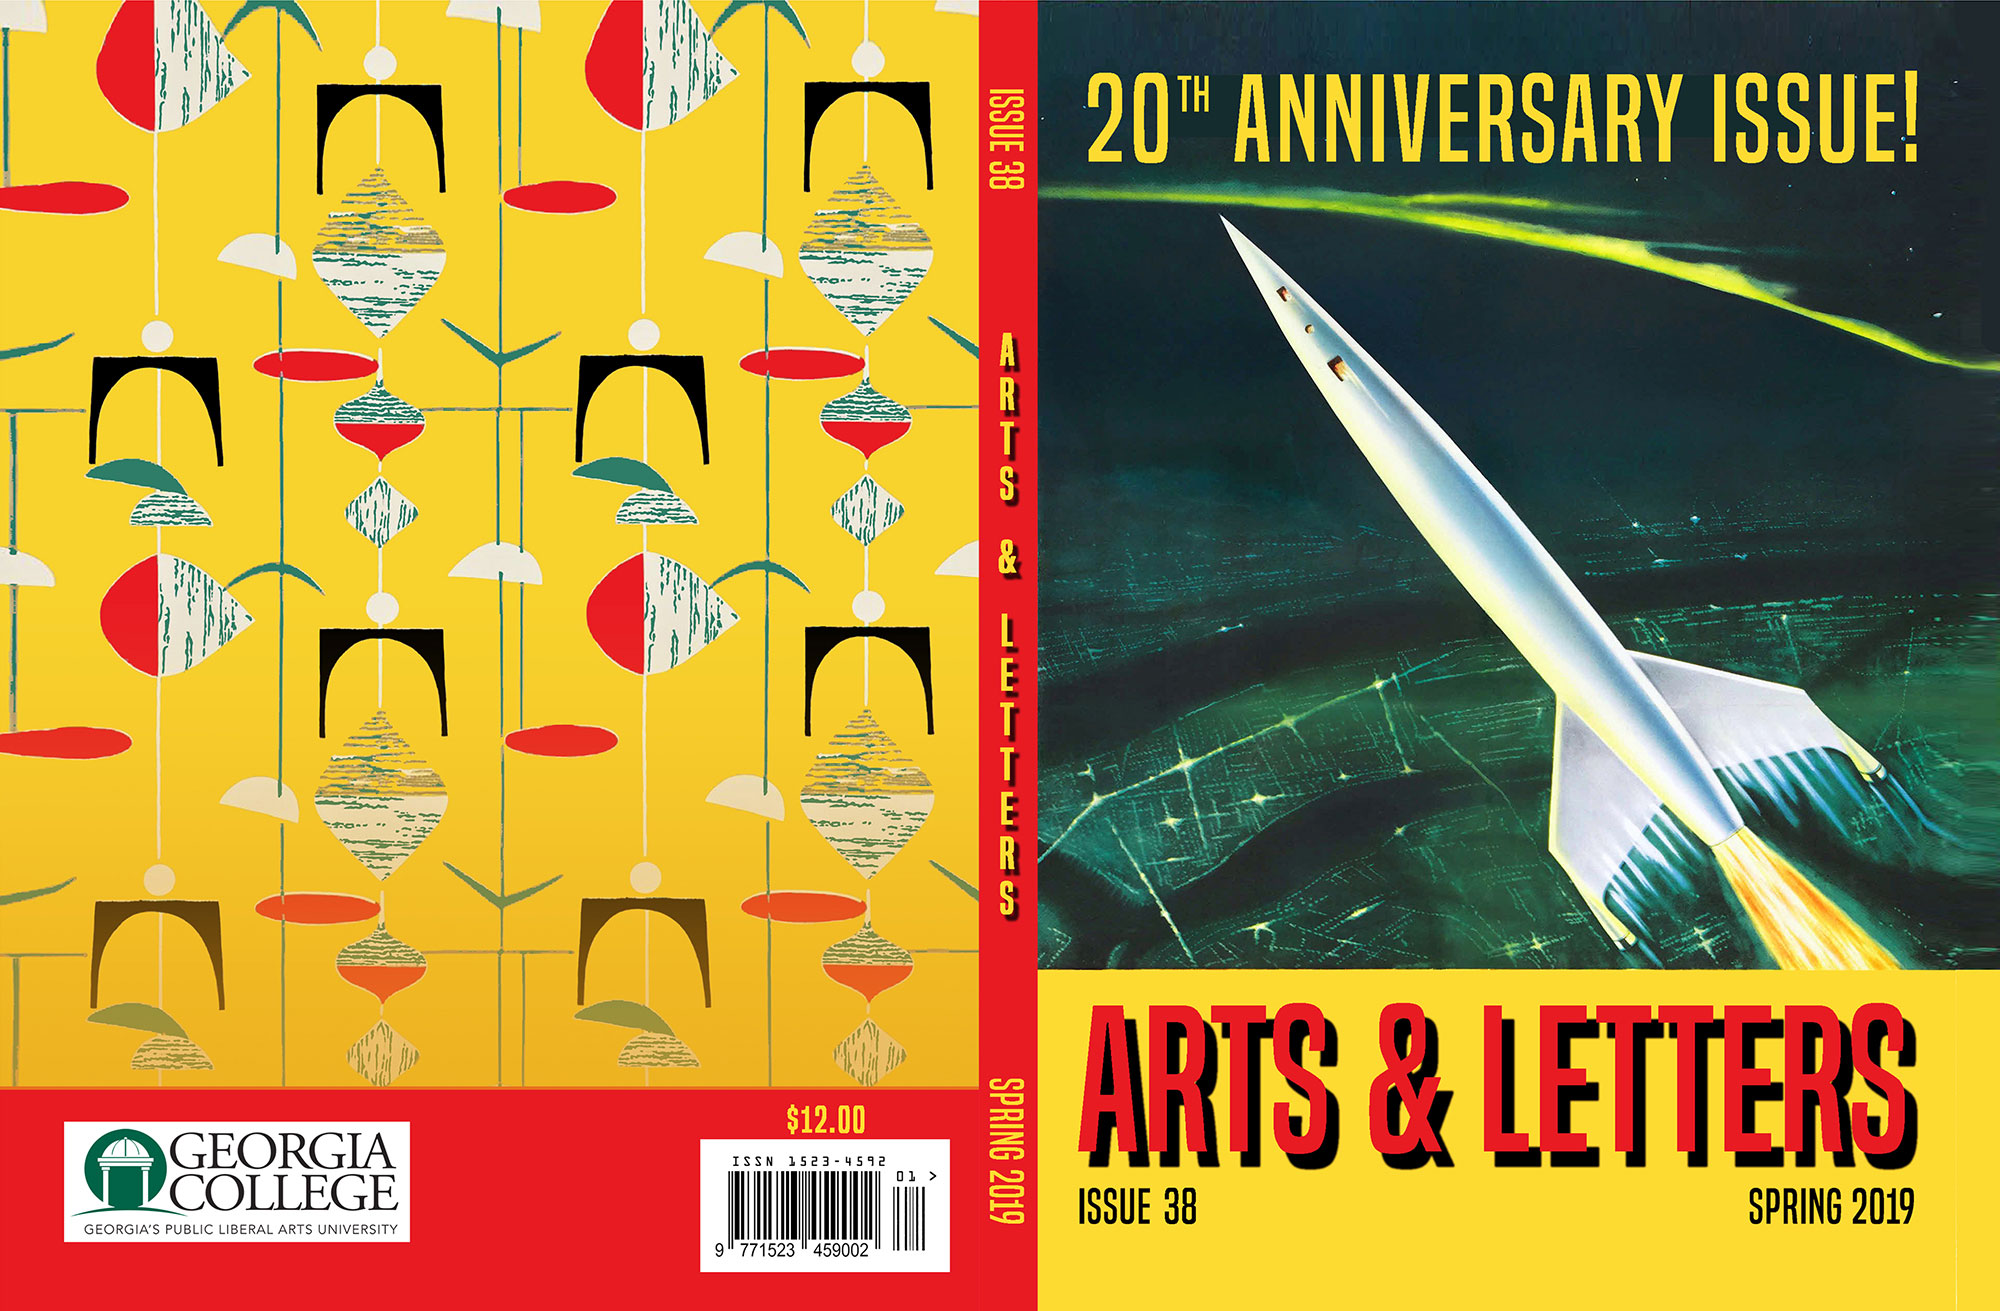 Arts & Letters, Issue 38